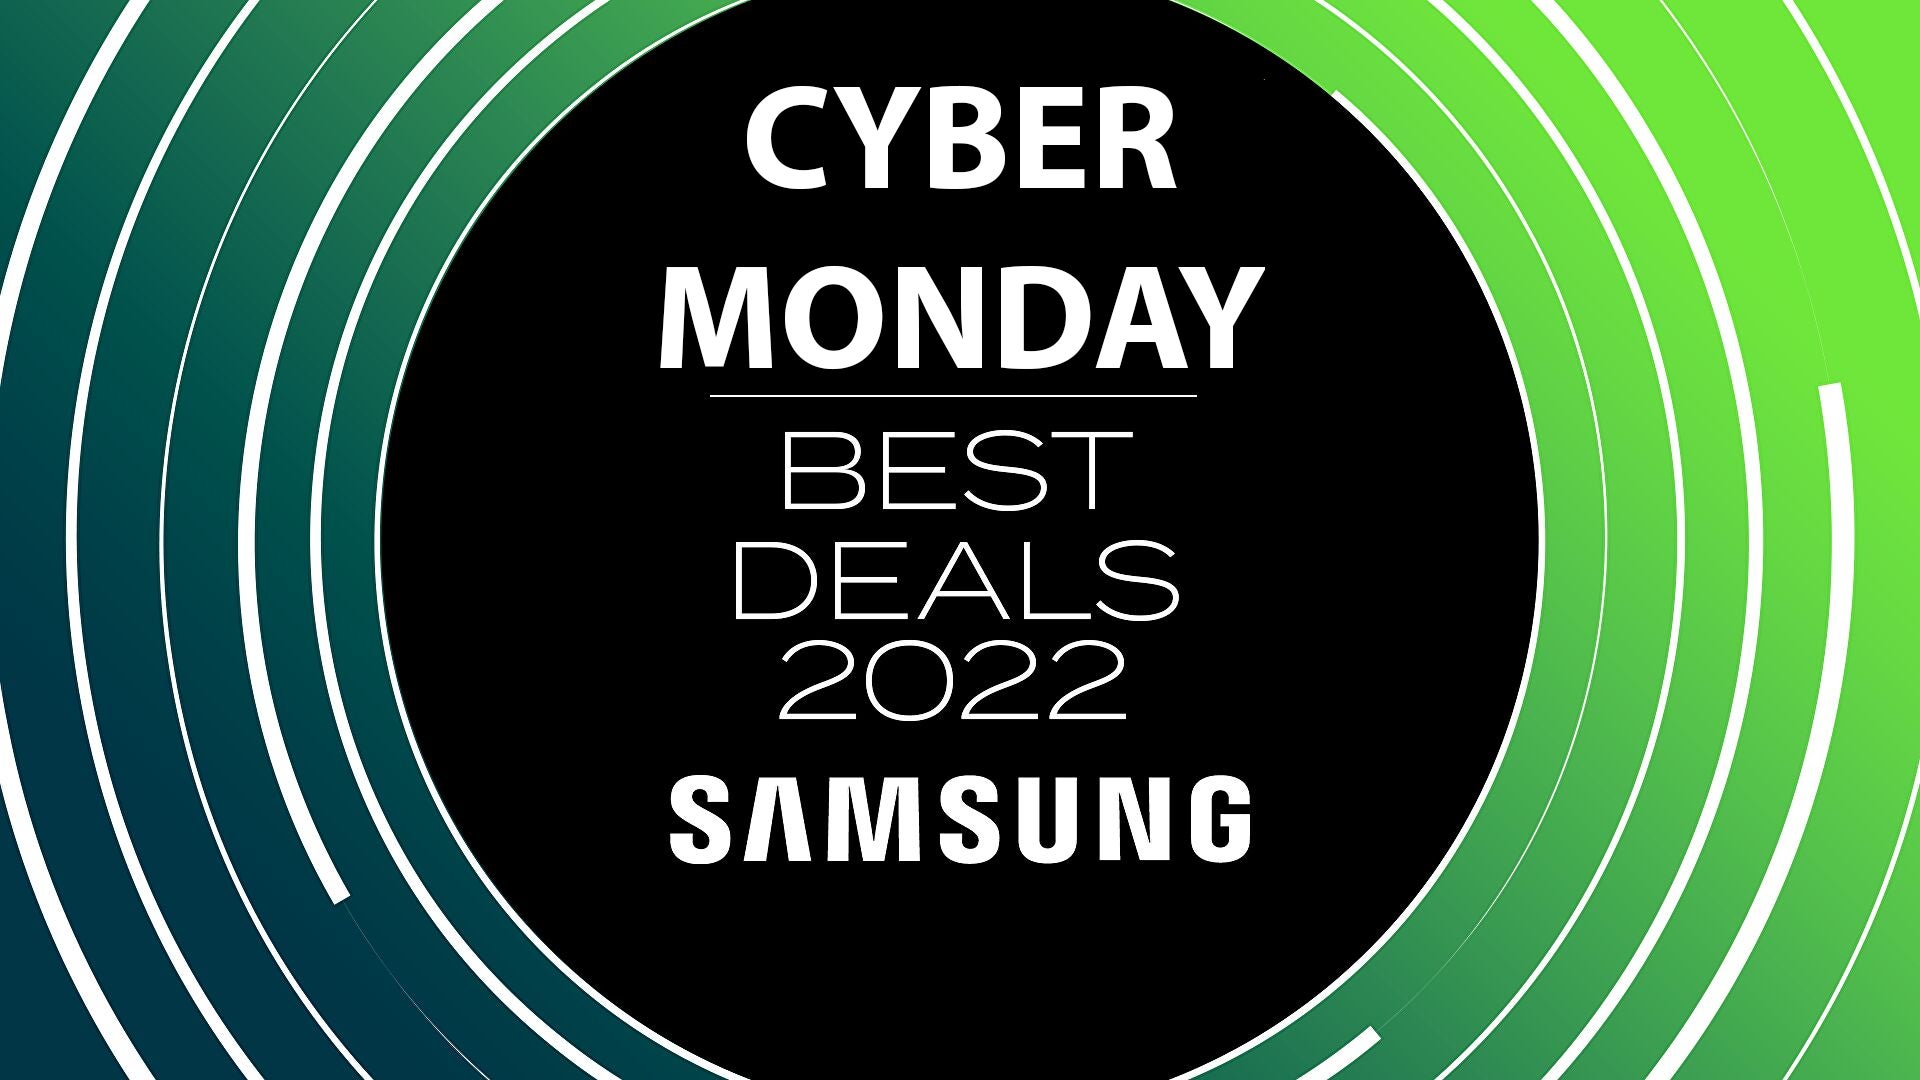 Image for Cyber Monday Samsung deals 2022: best offers and discounts